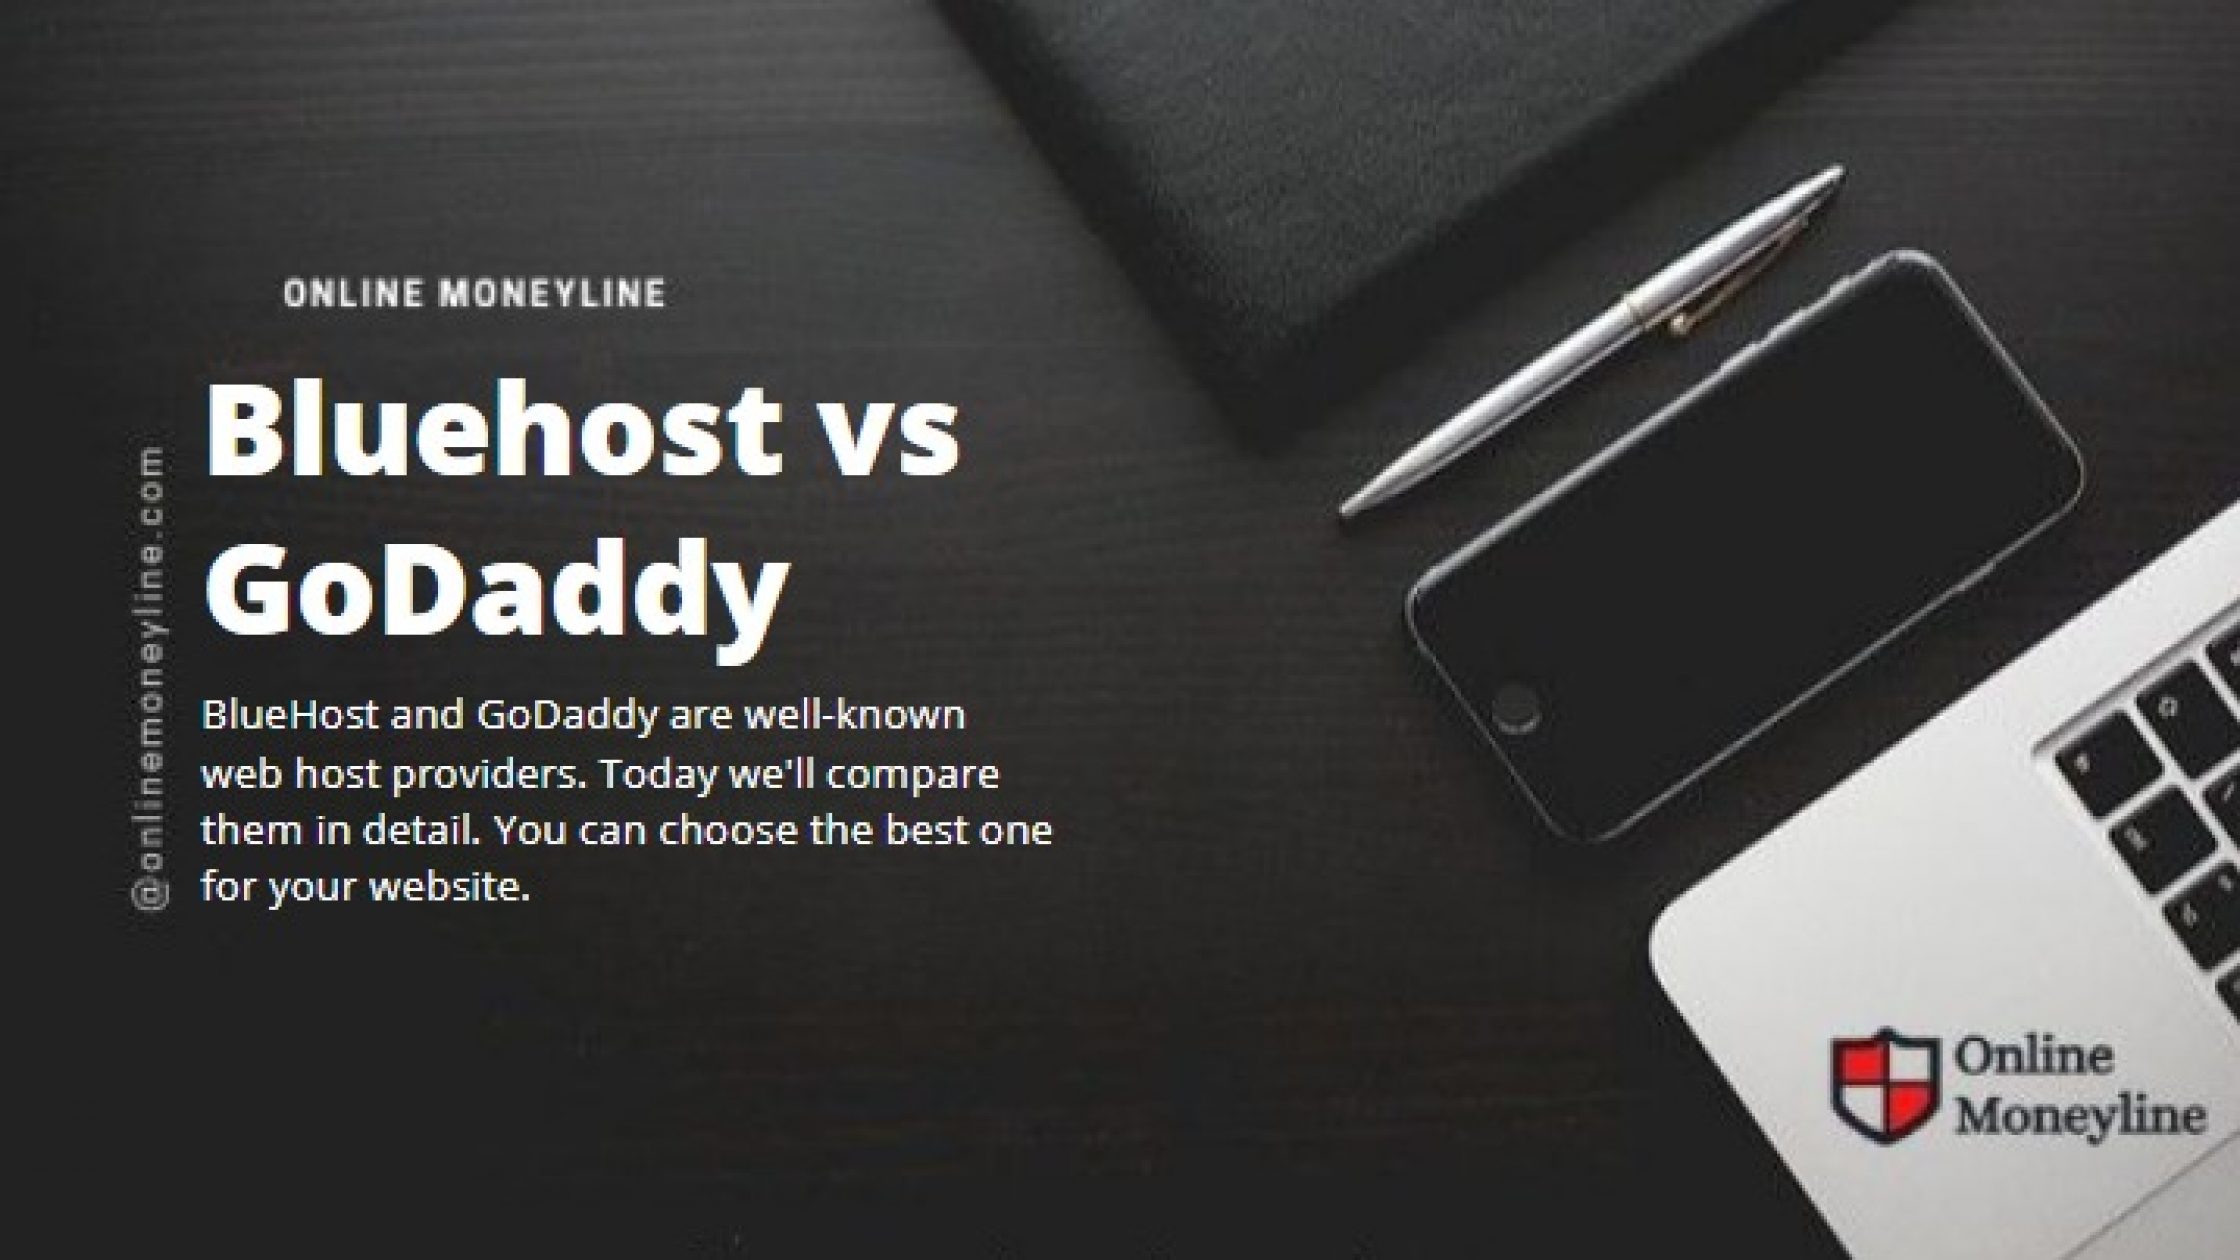 Bluehost vs GoDaddy | All You Need To Know